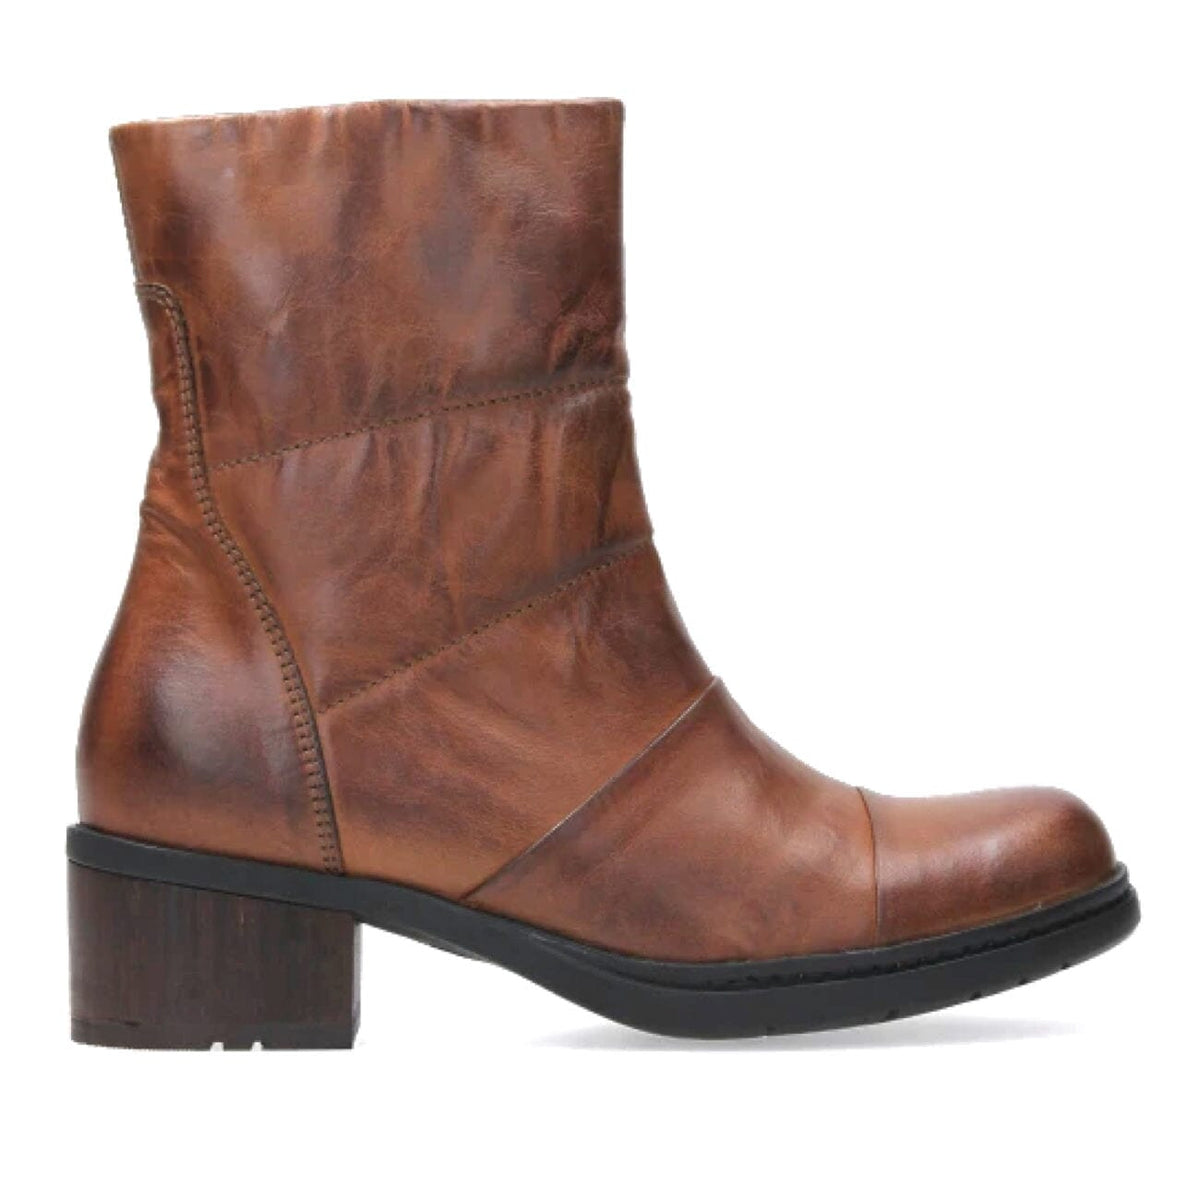 Wolky, Hinton, Boots, Leather, Cognac Boots Wolky 